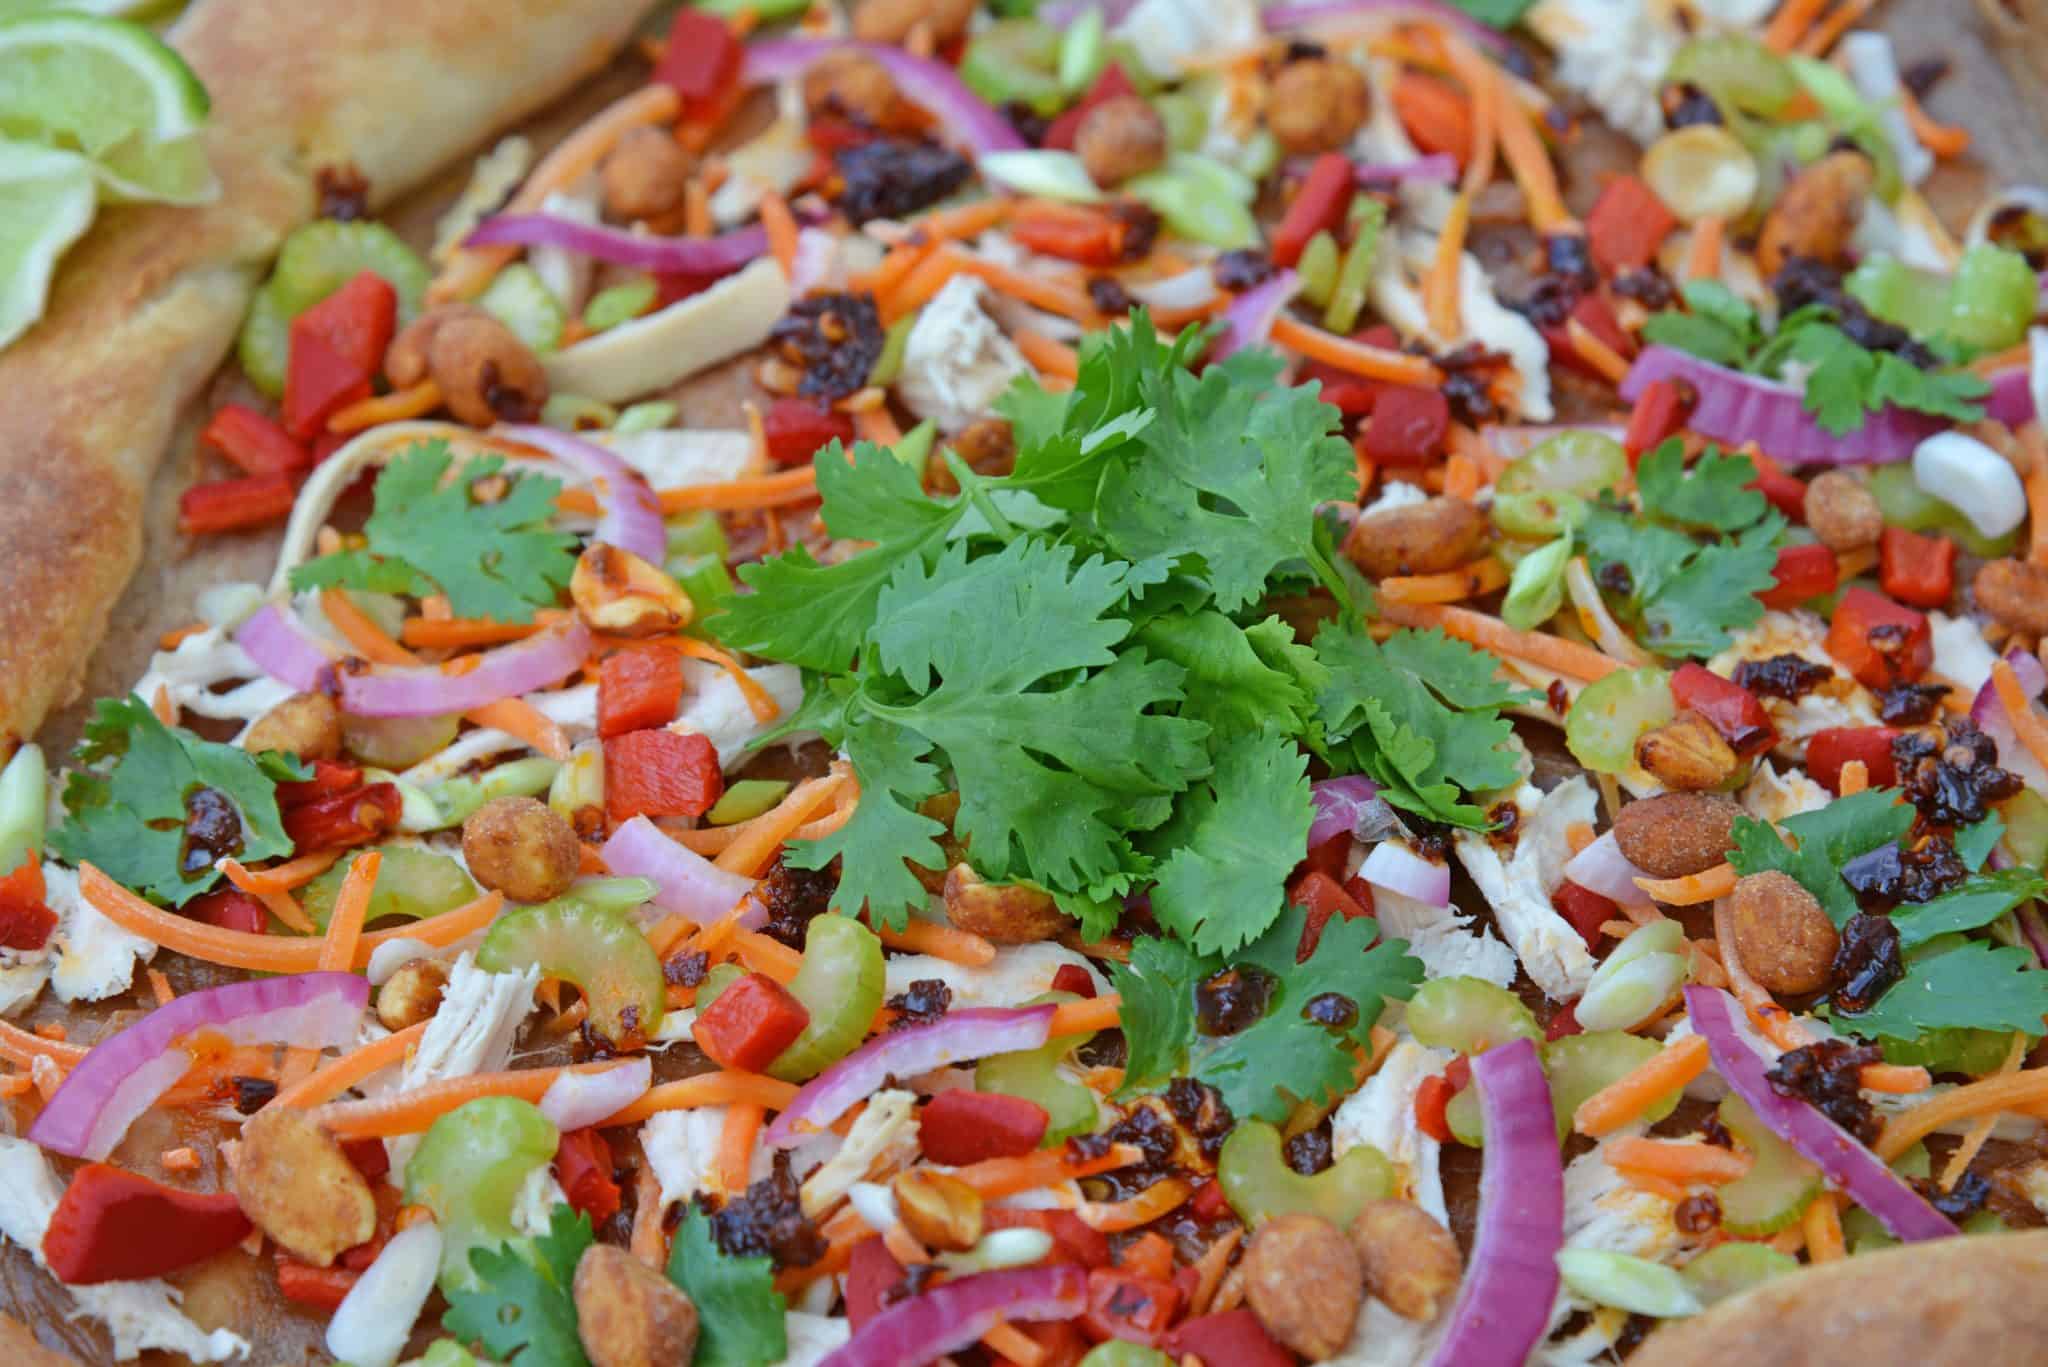 Spicy Thai Chicken Pizza uses a rich peanut satay sauce with shredded chicken, colorful vegetables and topped with sweet honey roasted peanuts and spicy chili oil. #thaichicken #homemadepizza www.savoryexperiments.com 